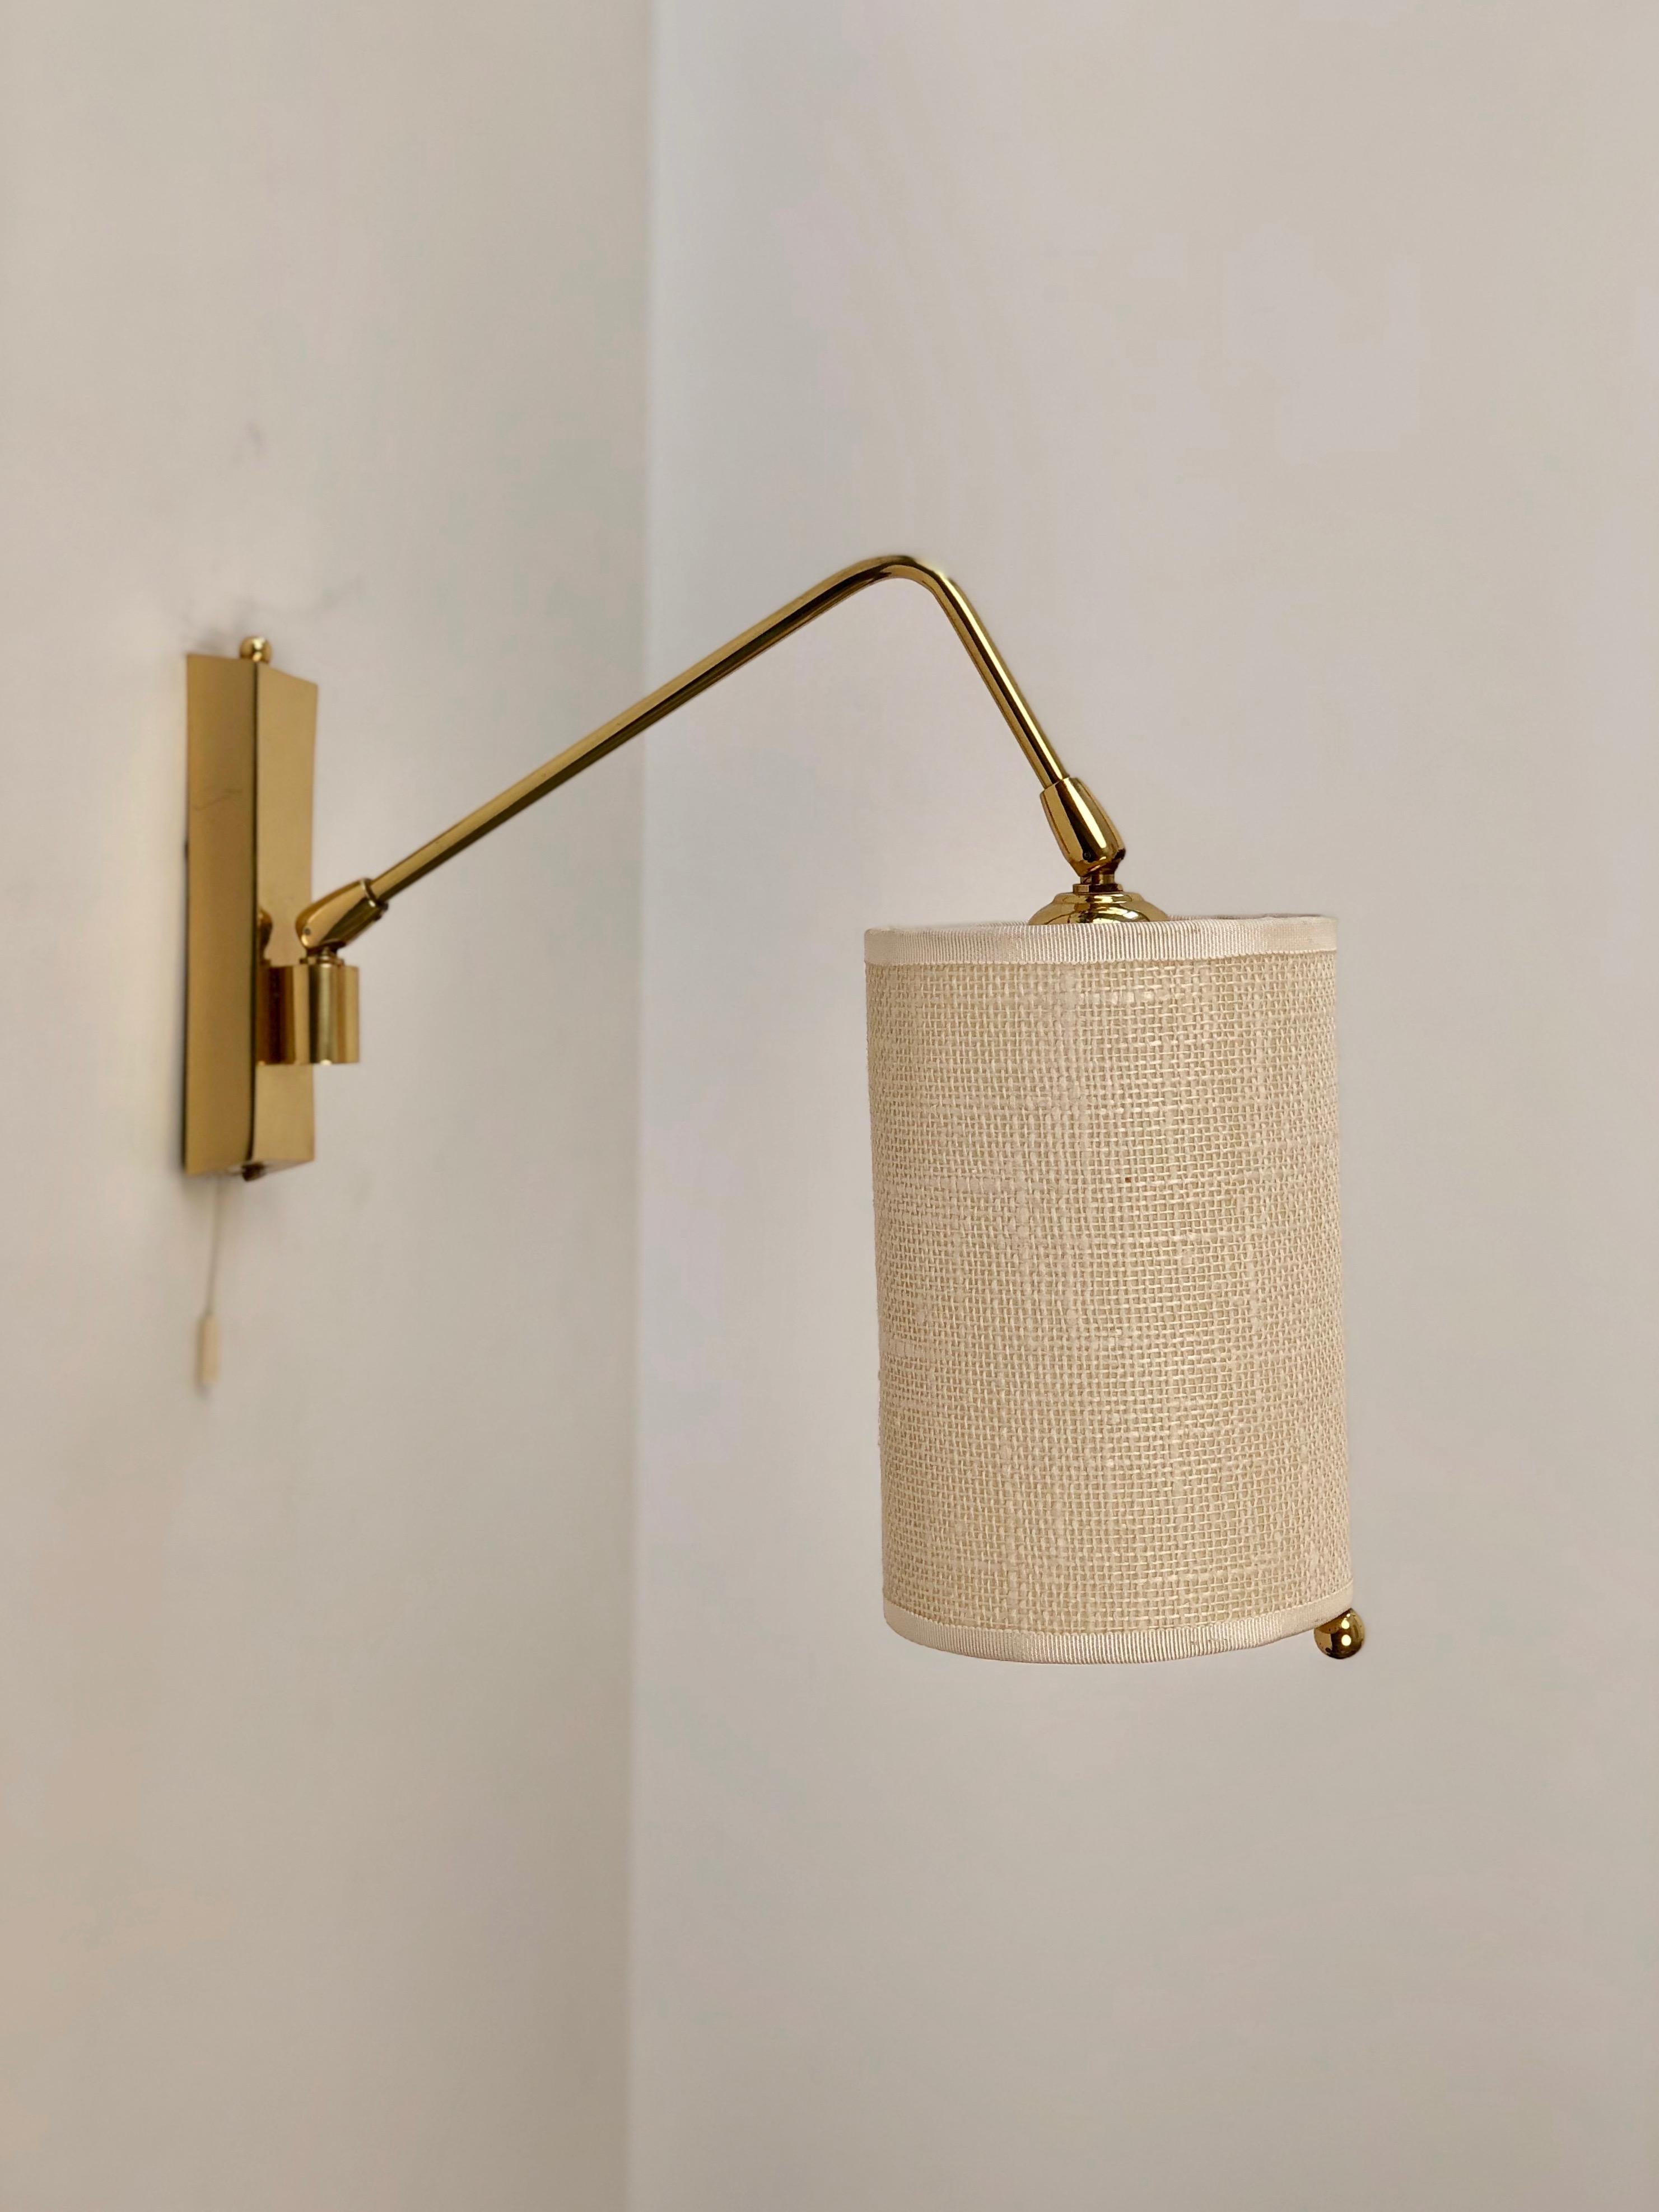 Adjustable Wall Light in Brass with Linen Shade 1960, Austria 1